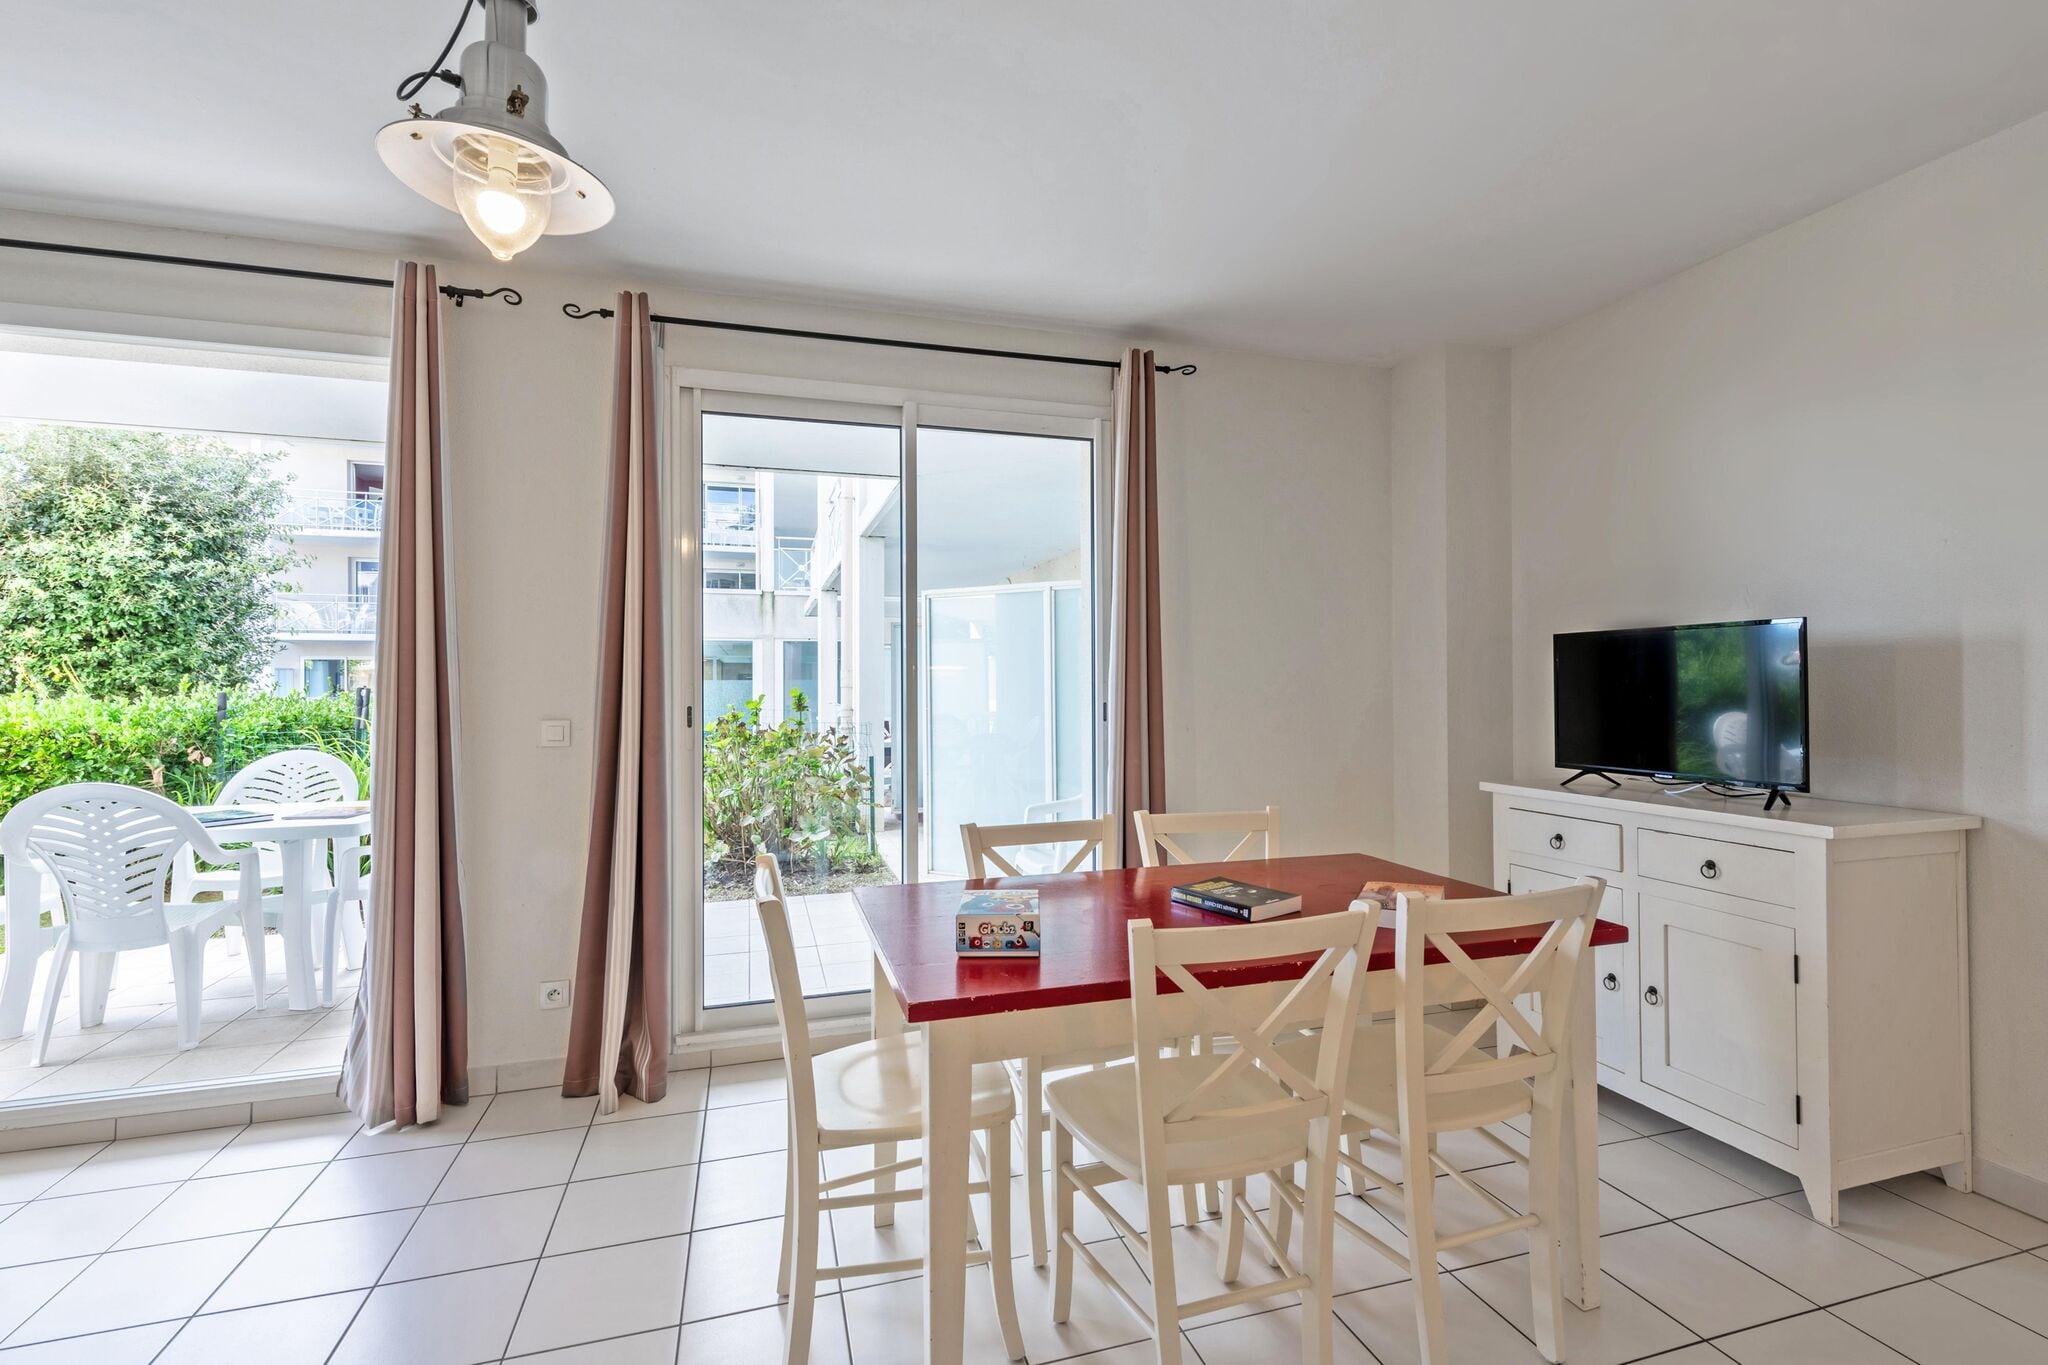 Apartment near the beach in the Finistère